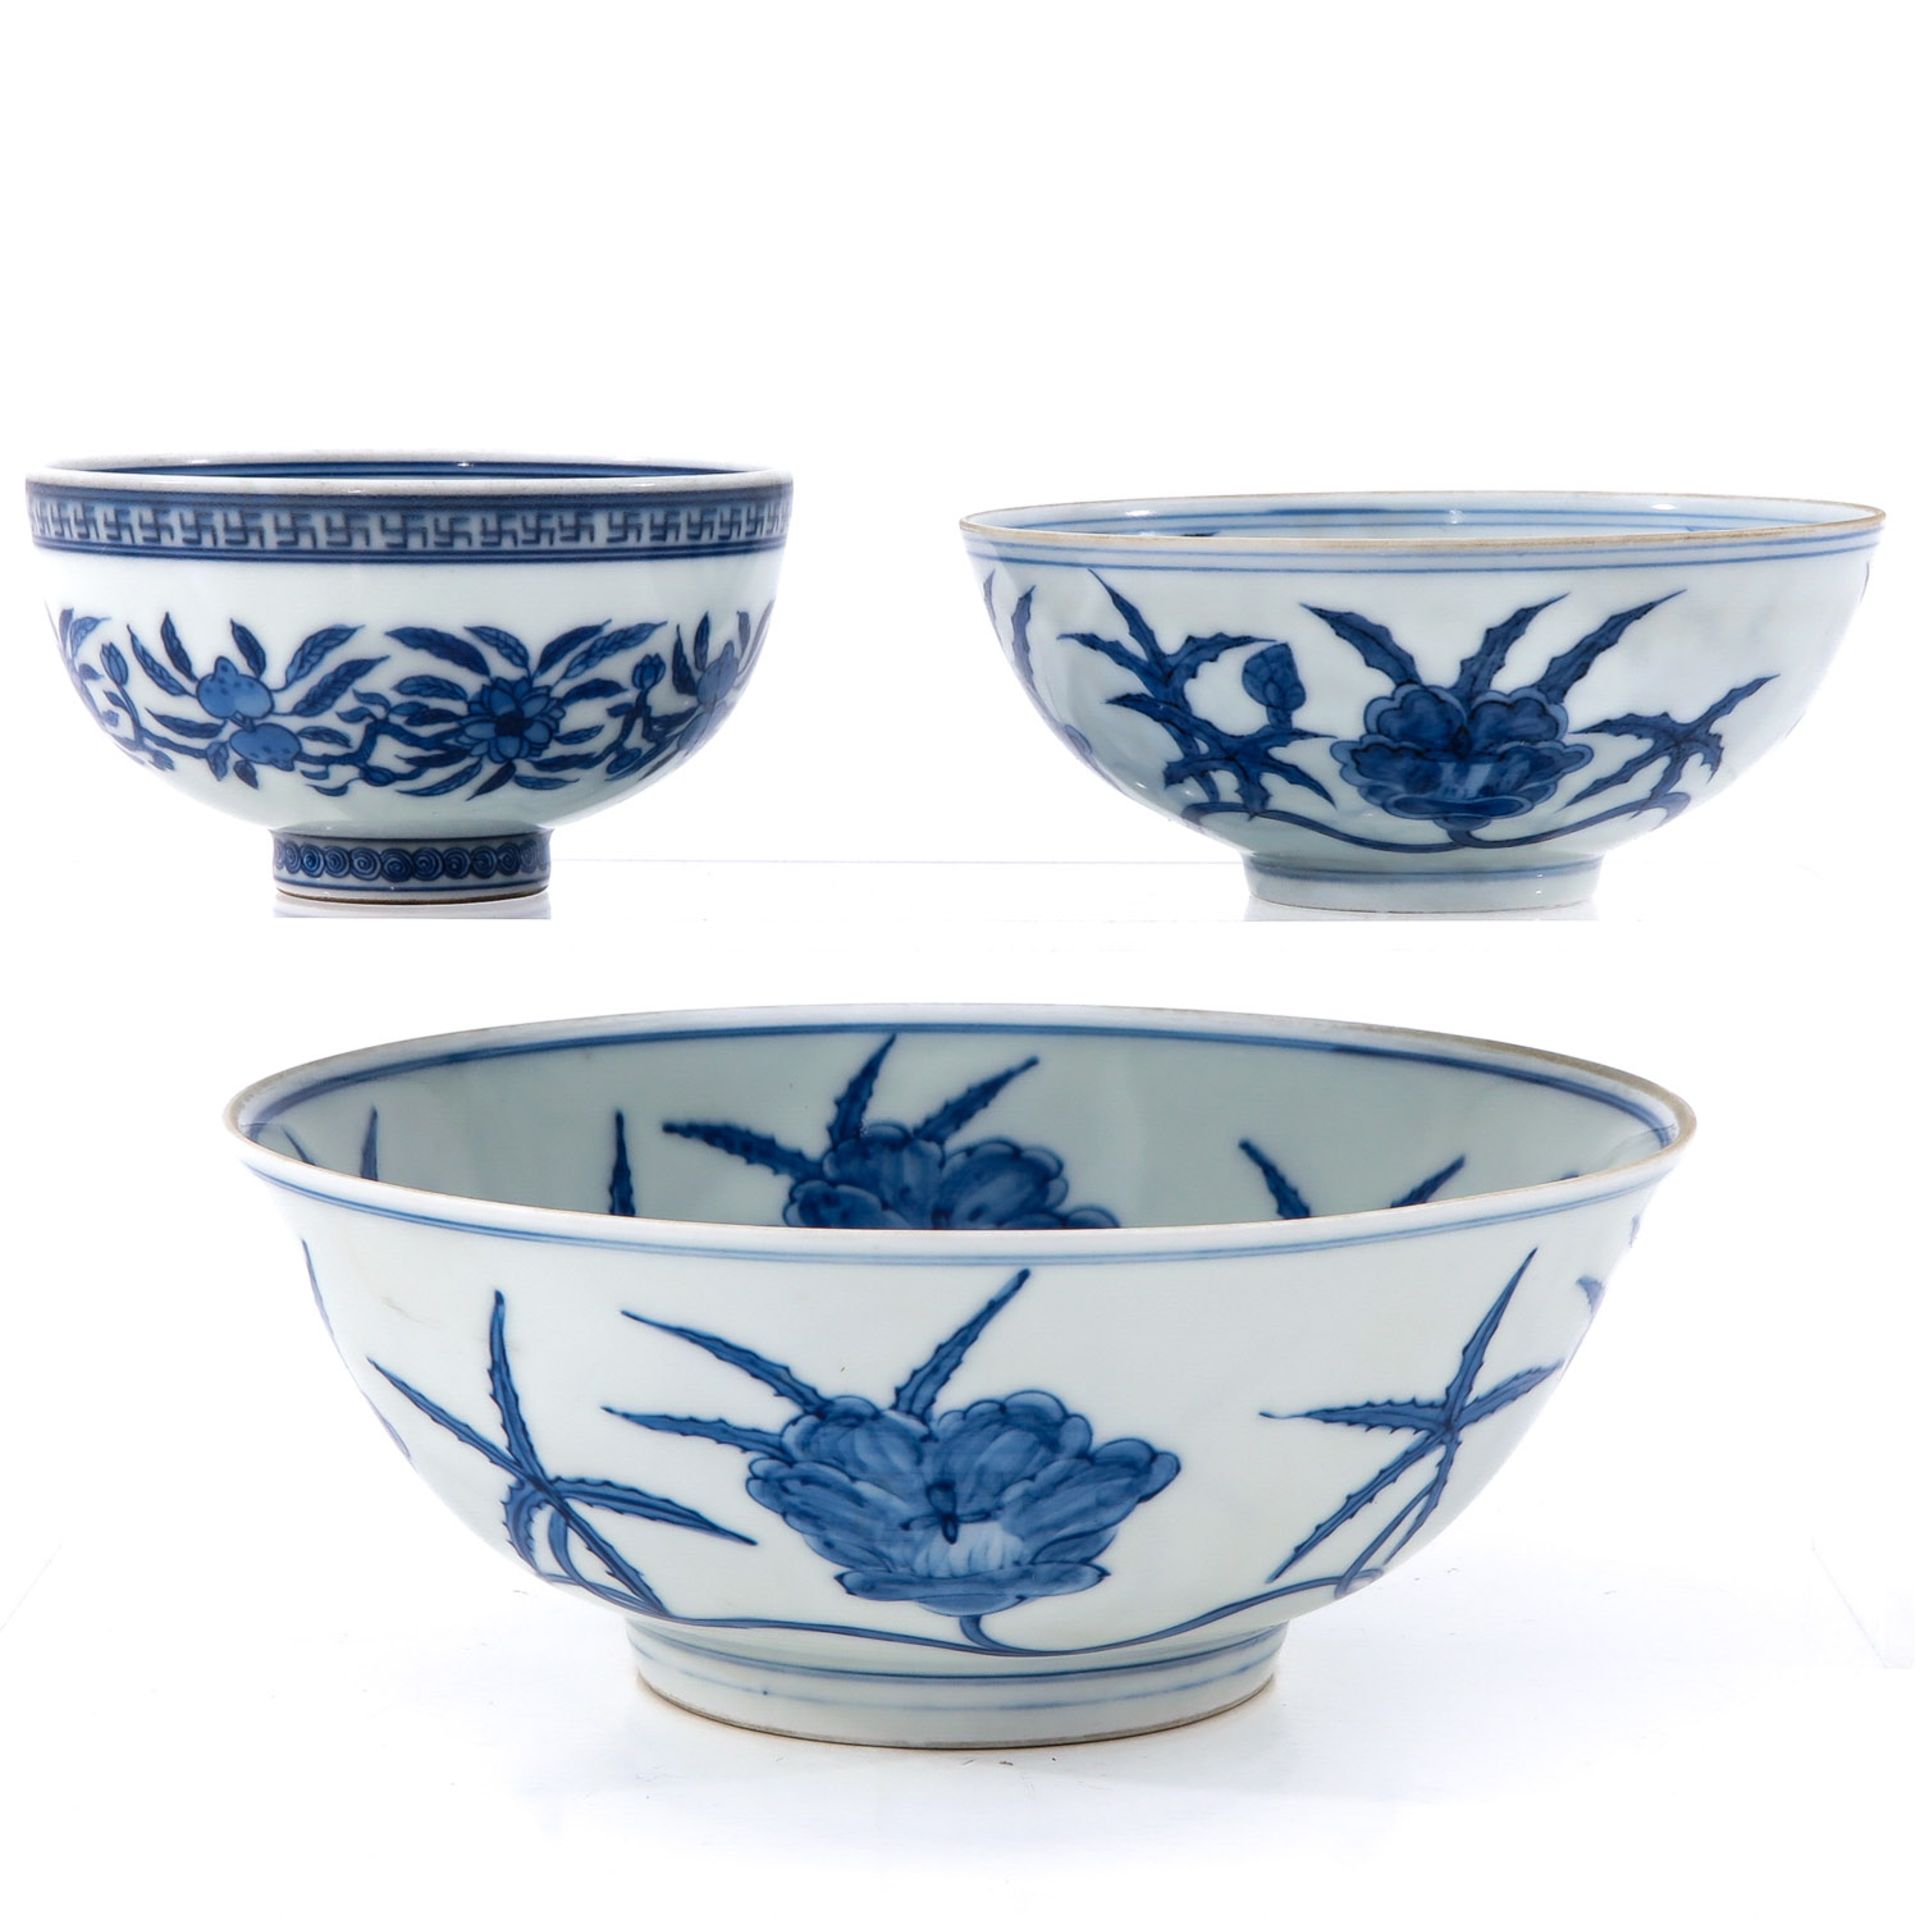 A Collection of 3 Blue and White Bowls